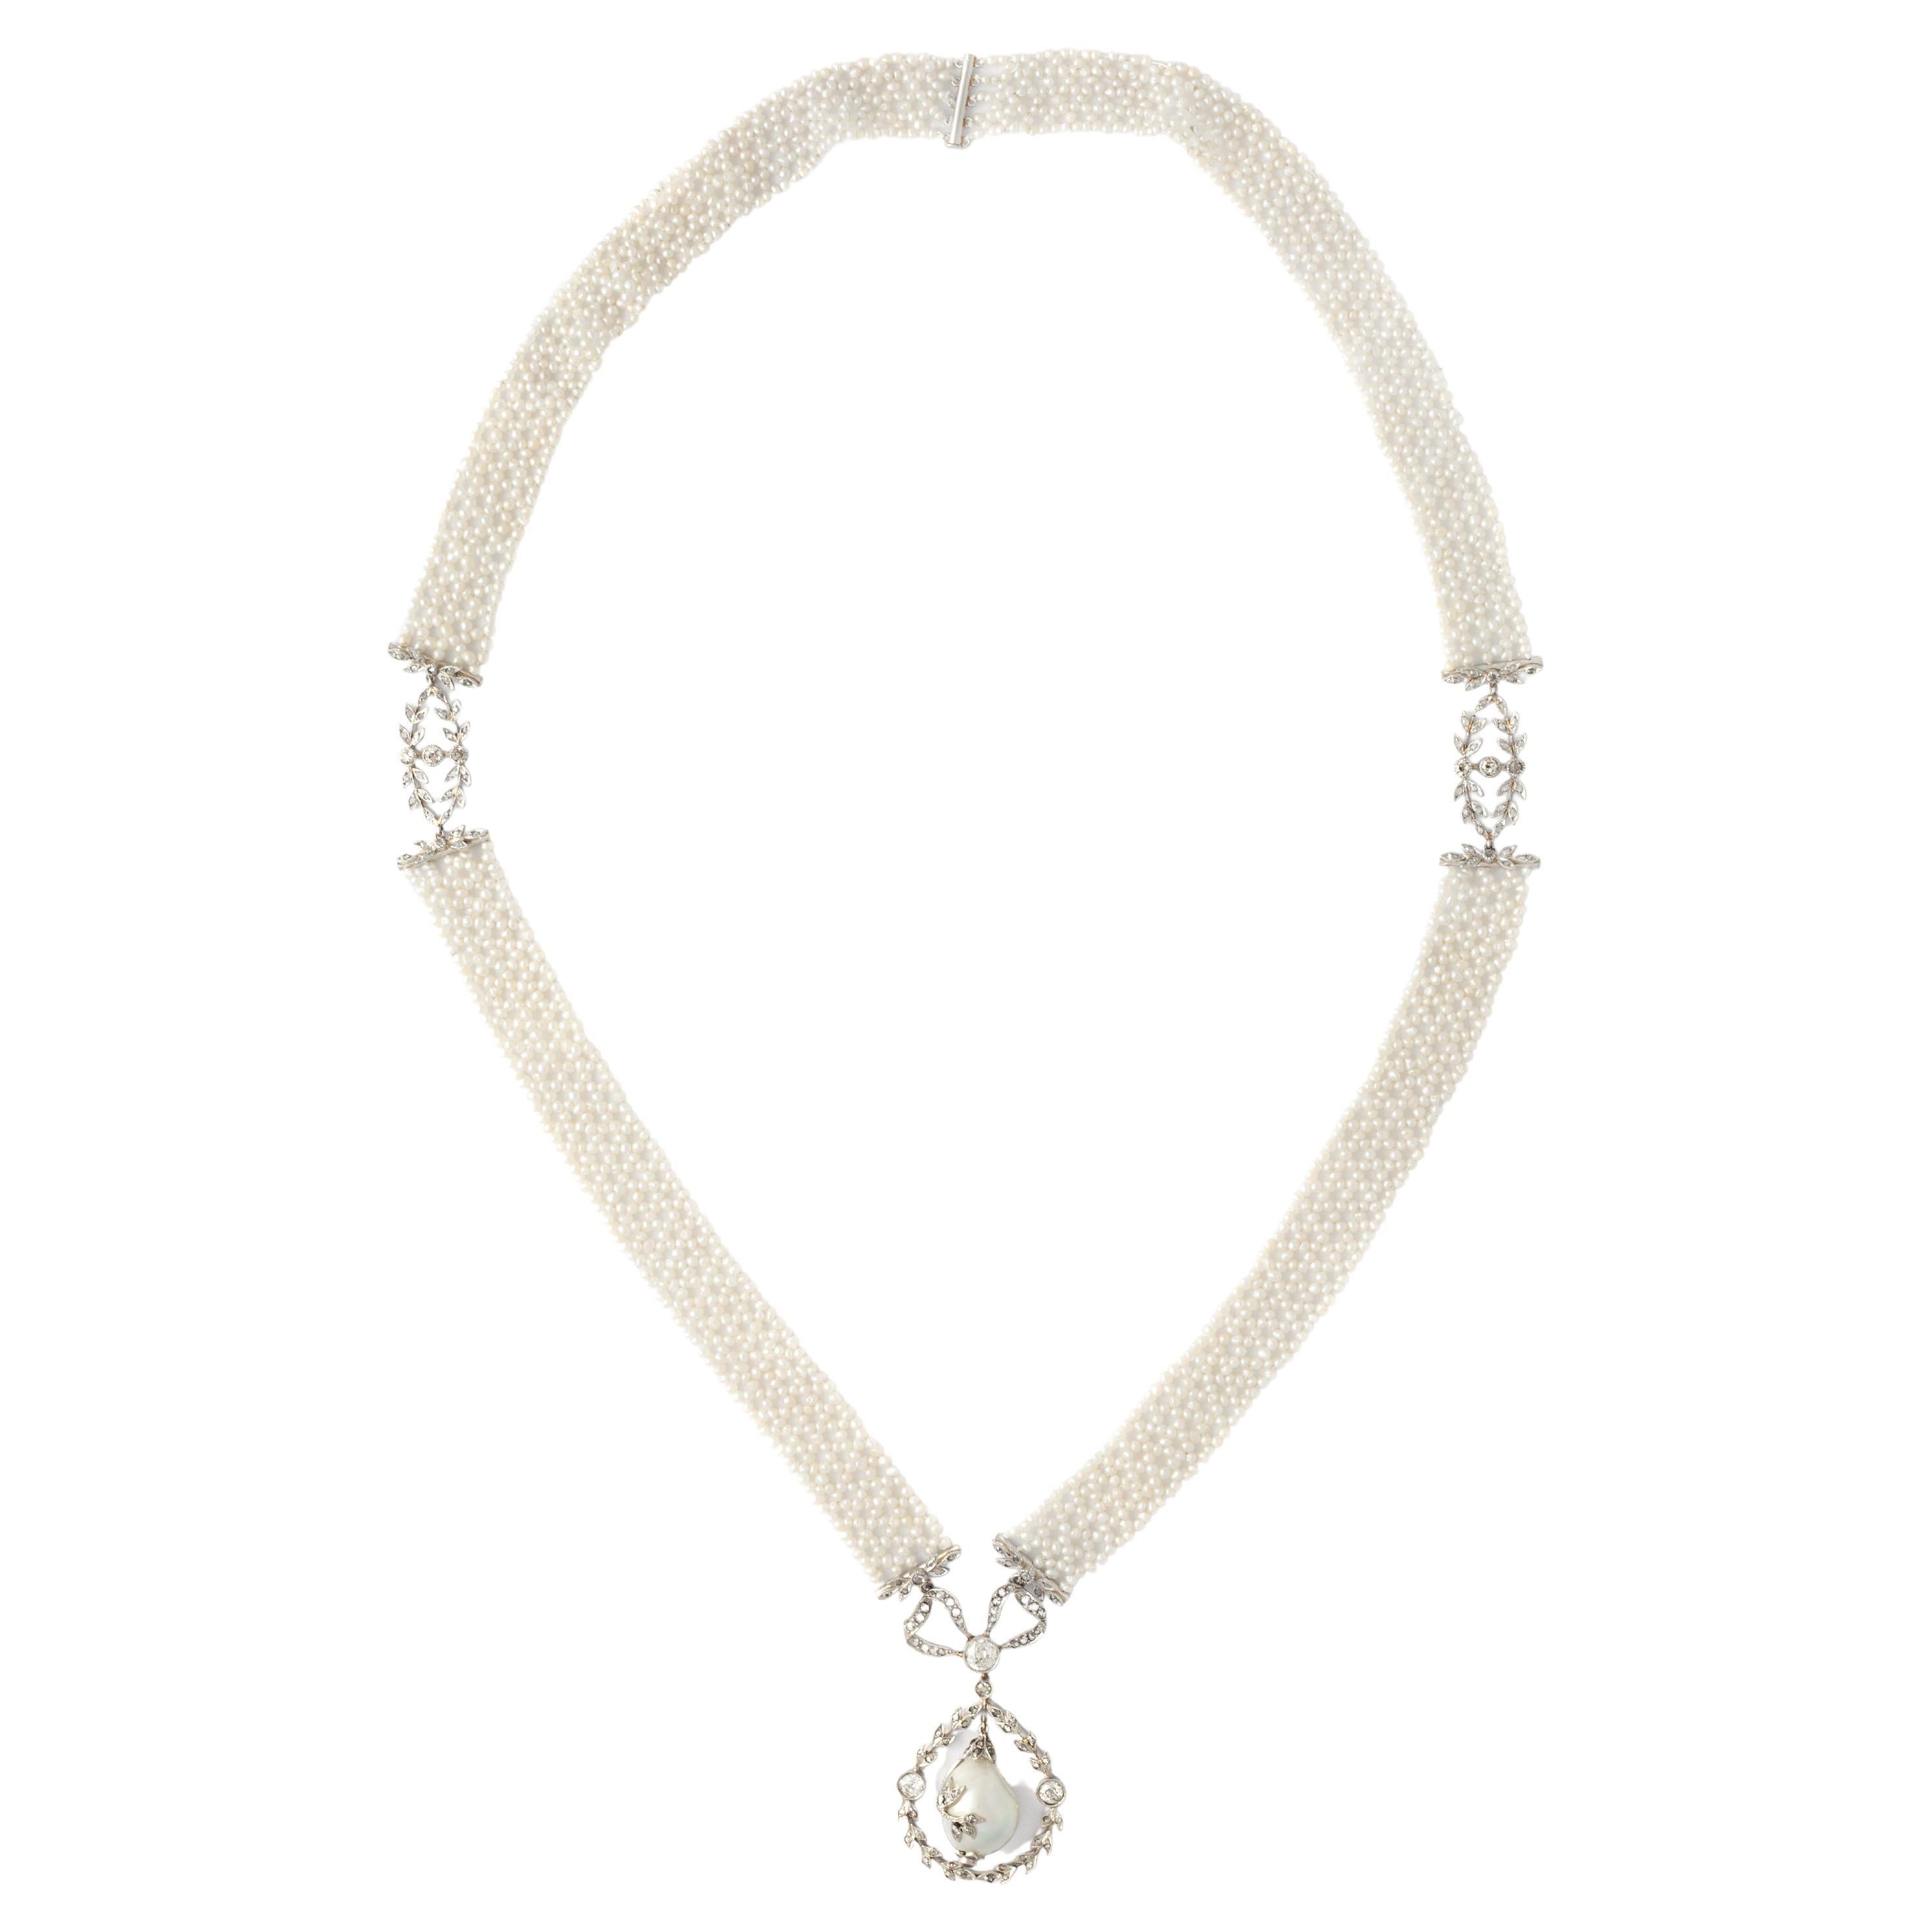 Belle Epoque necklace natural pearl, diamond and platinum. Pendent is holding a baroque natural pearl 13.87 carats not treated. Certified Swiss Laboratory.

This Belle Epoque necklace showcases a natural baroque pearl, weighing 13.87 carats,